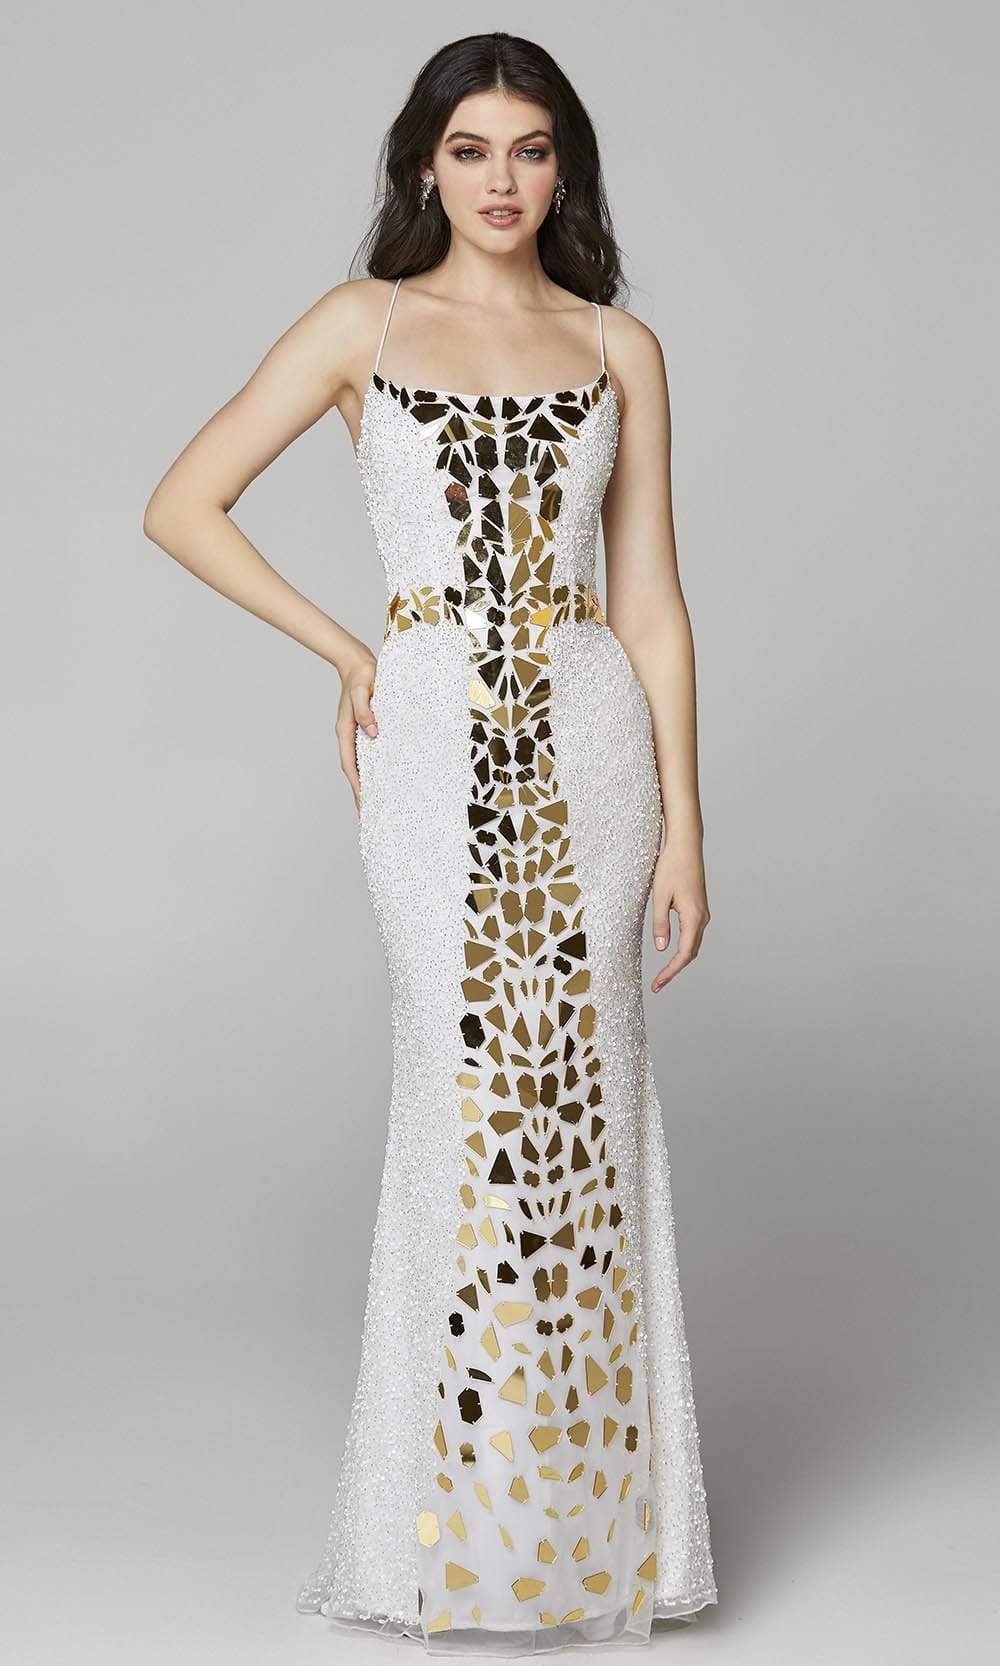 Primavera Couture - 3616 Fully Beaded Cut-Glass Accent Evening Dress Prom Dresses 00 / Ivory Gold